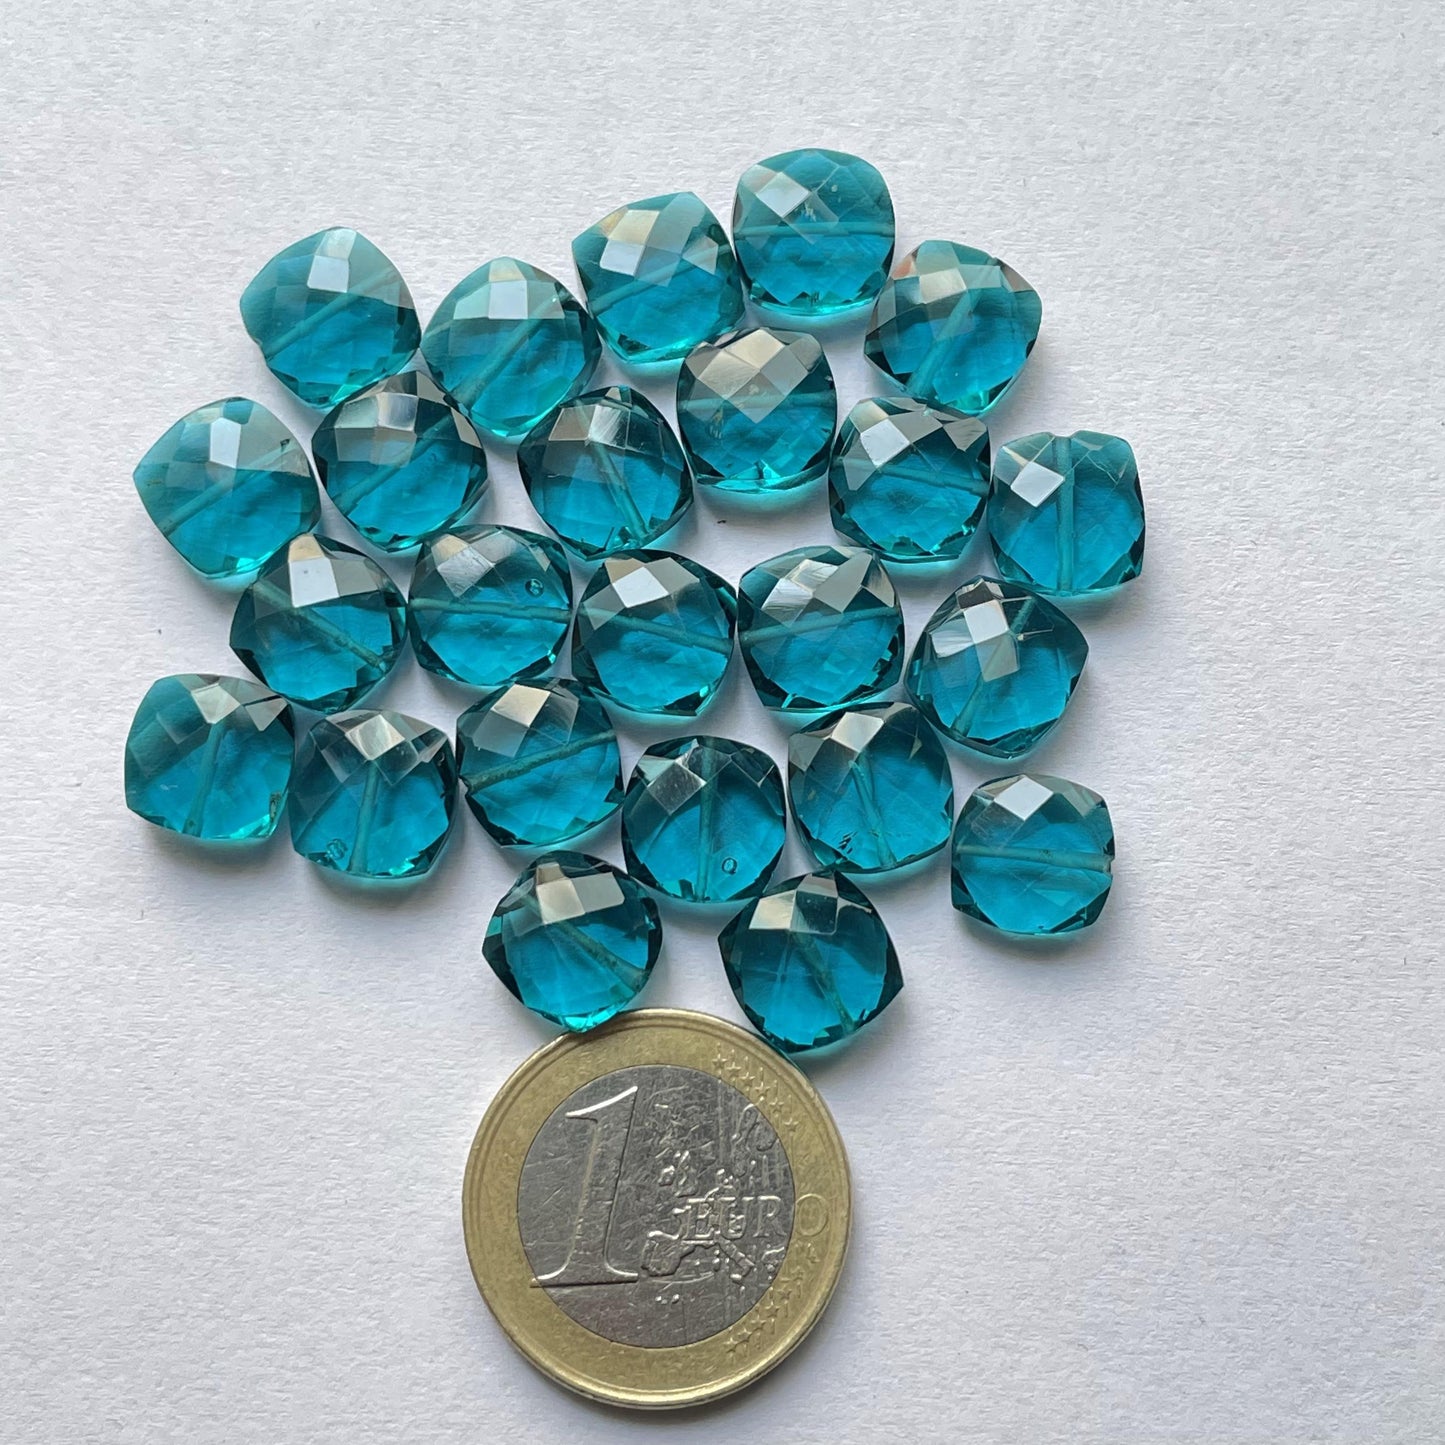 London blue topaz Faceted Nice Quality (10 mm) Cushion Shape